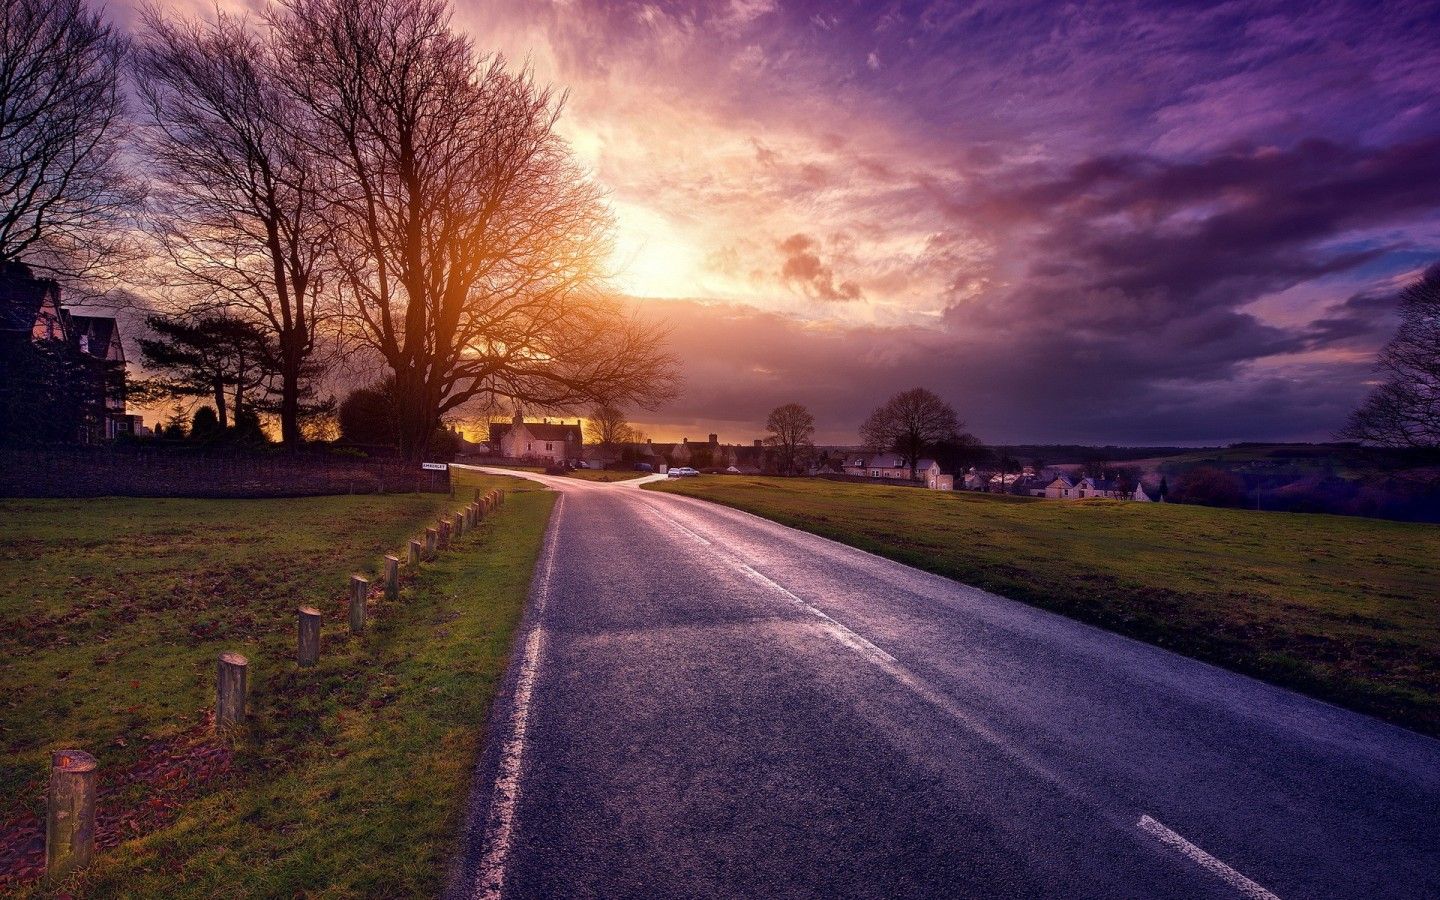 A road in the countryside at sunset - Road, landscape